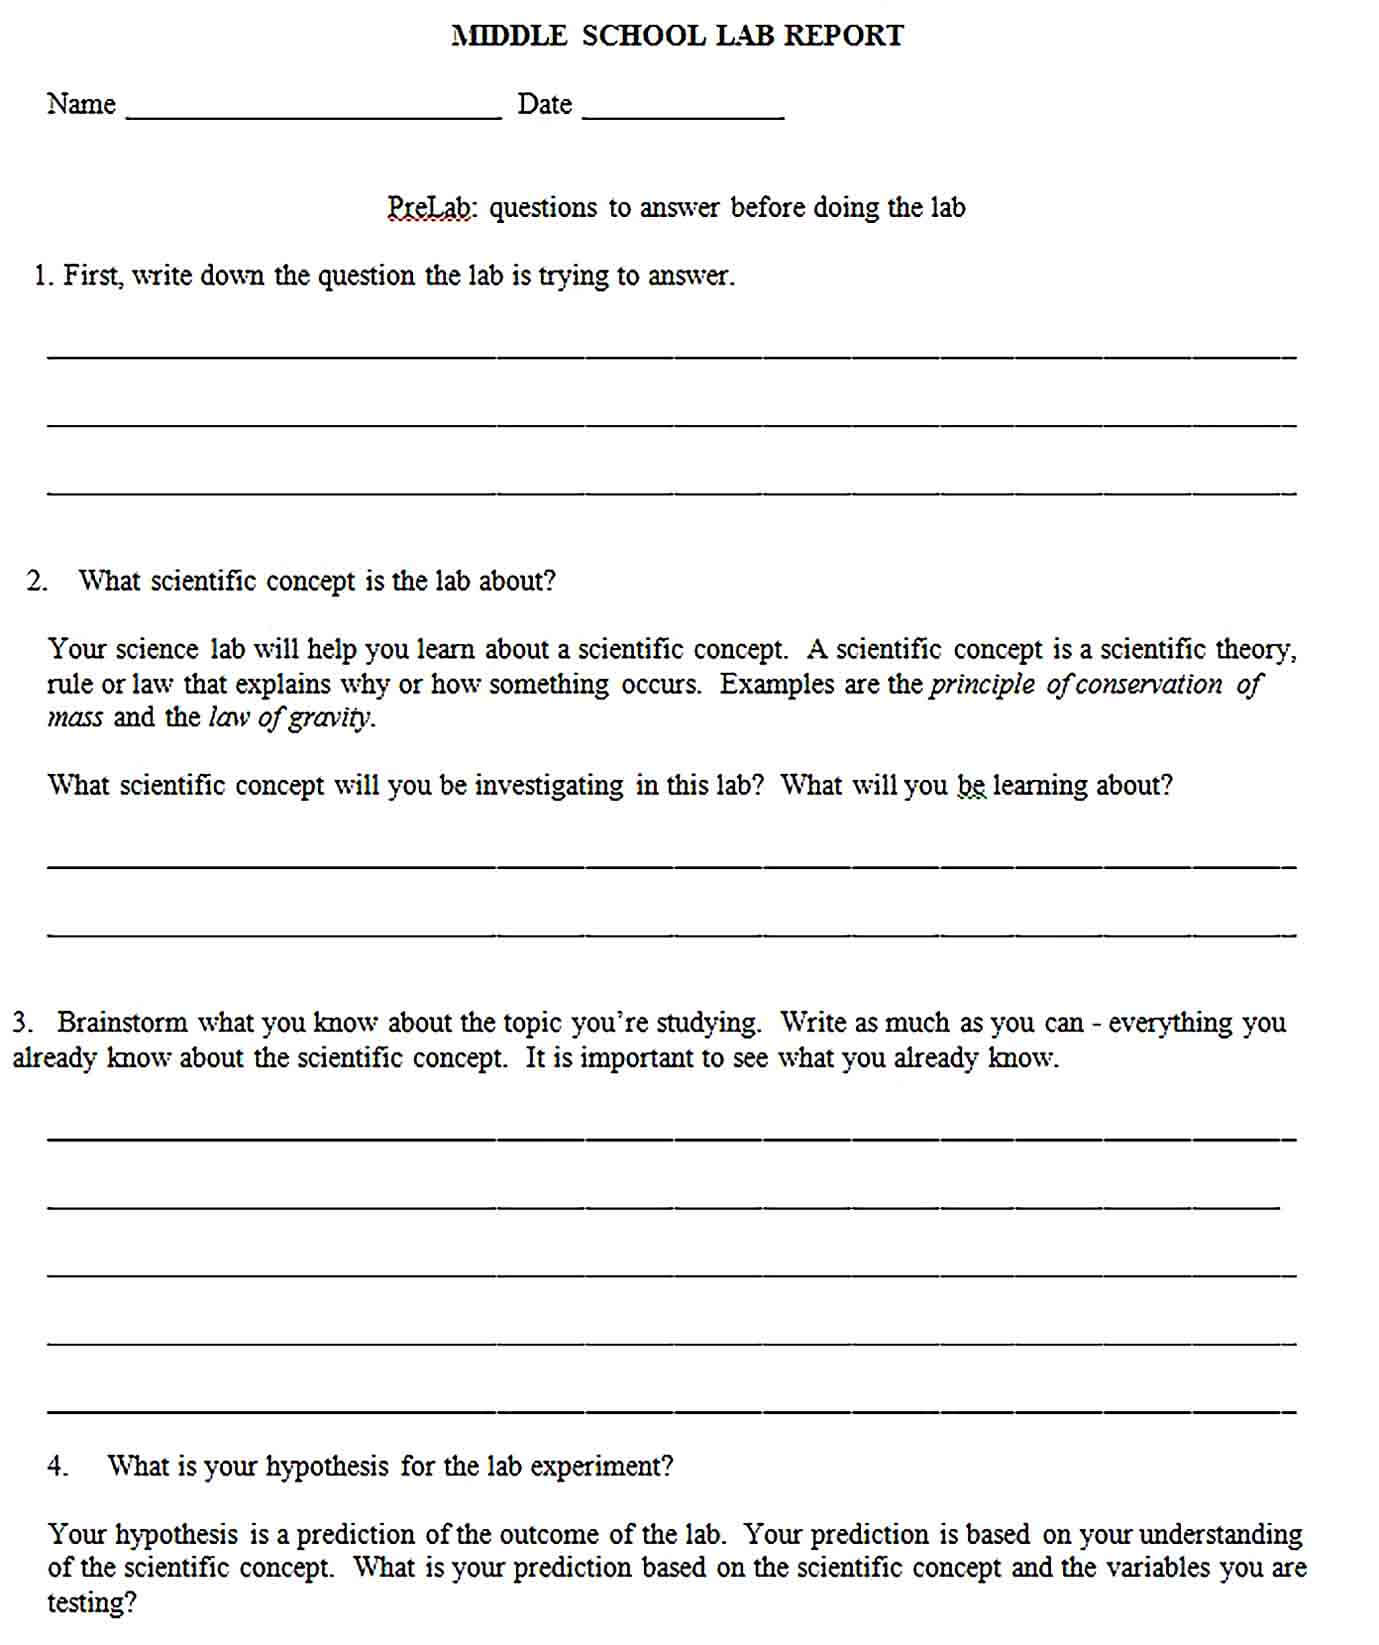 Sample Middle School Lab Report Template